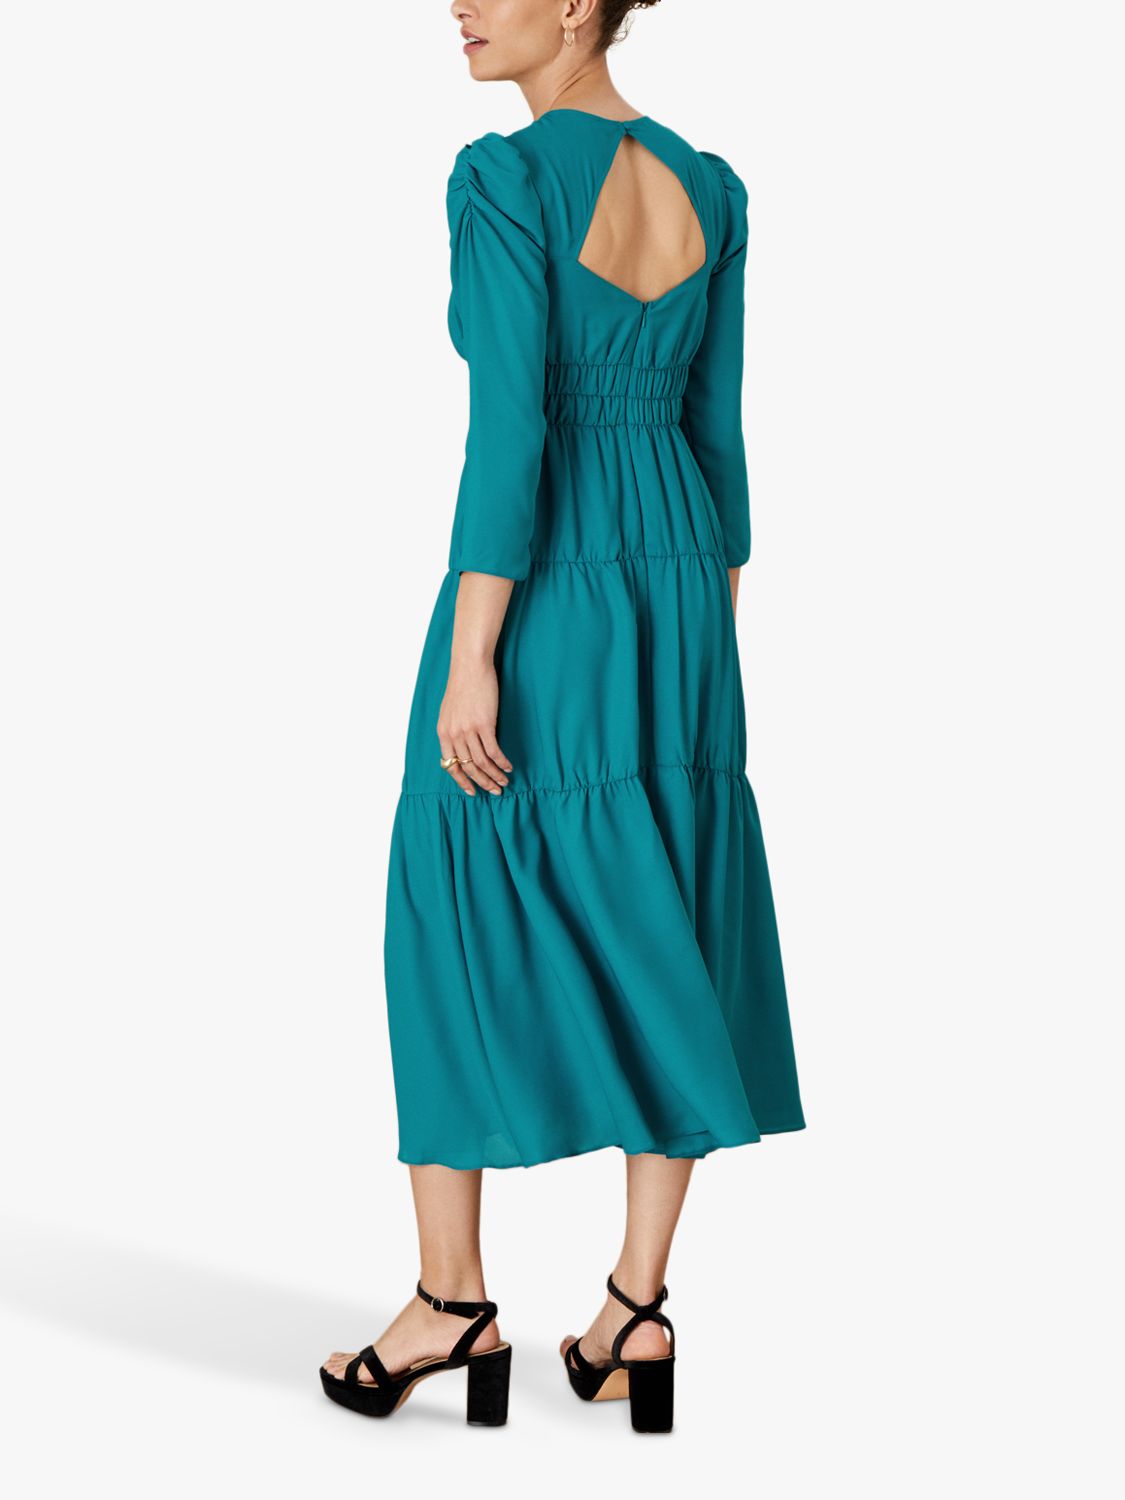 Monsoon Penny Ruched Midi Dress, Teal, 8